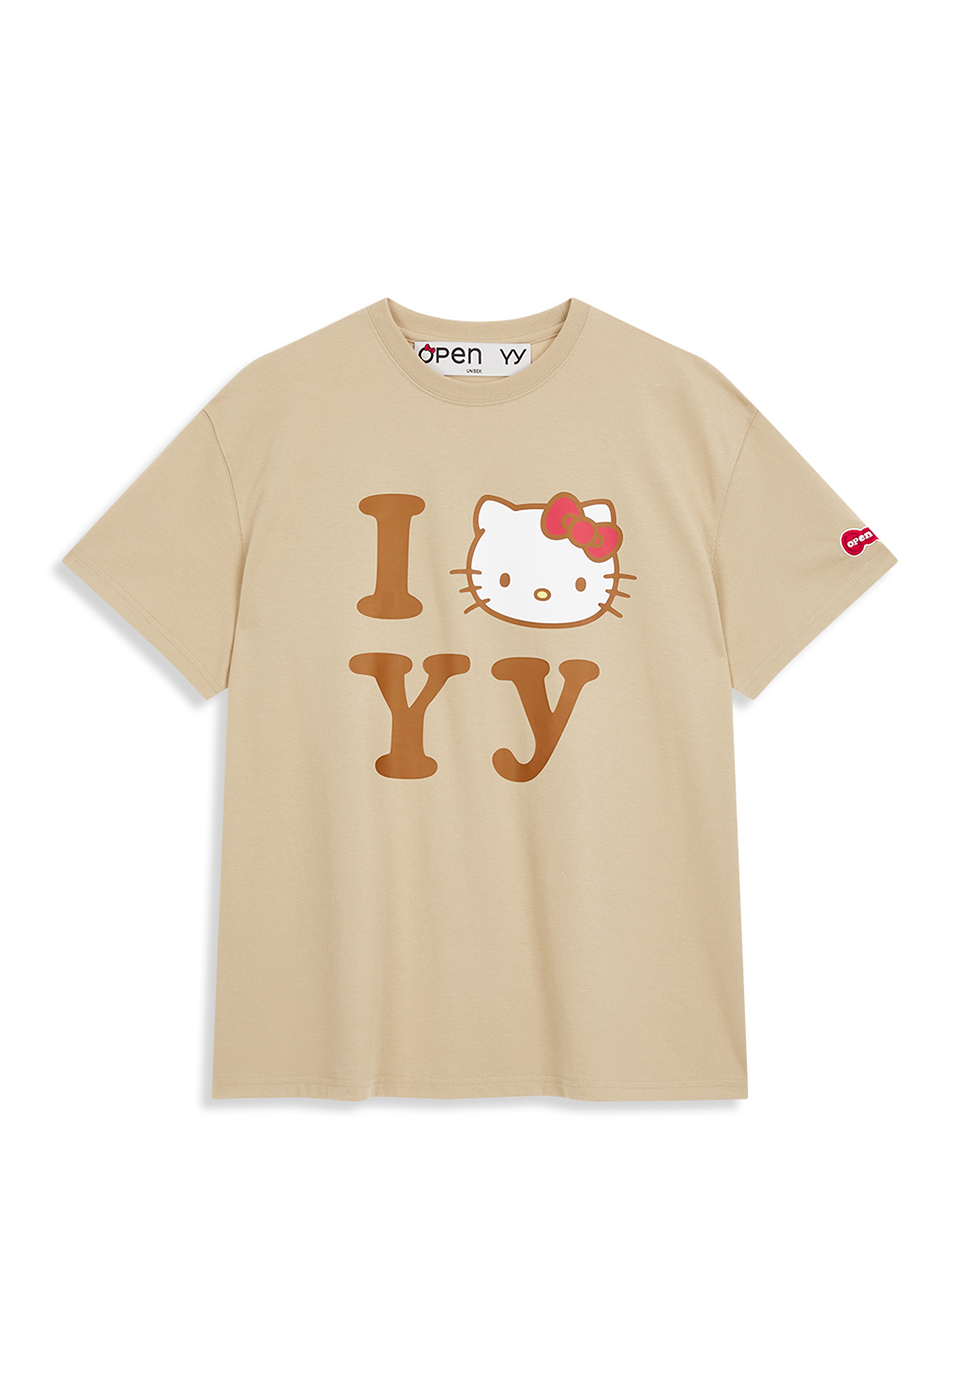 [6/11 DELIVERY] HELLO KITTY X YY T-SHIRT, BEIGE